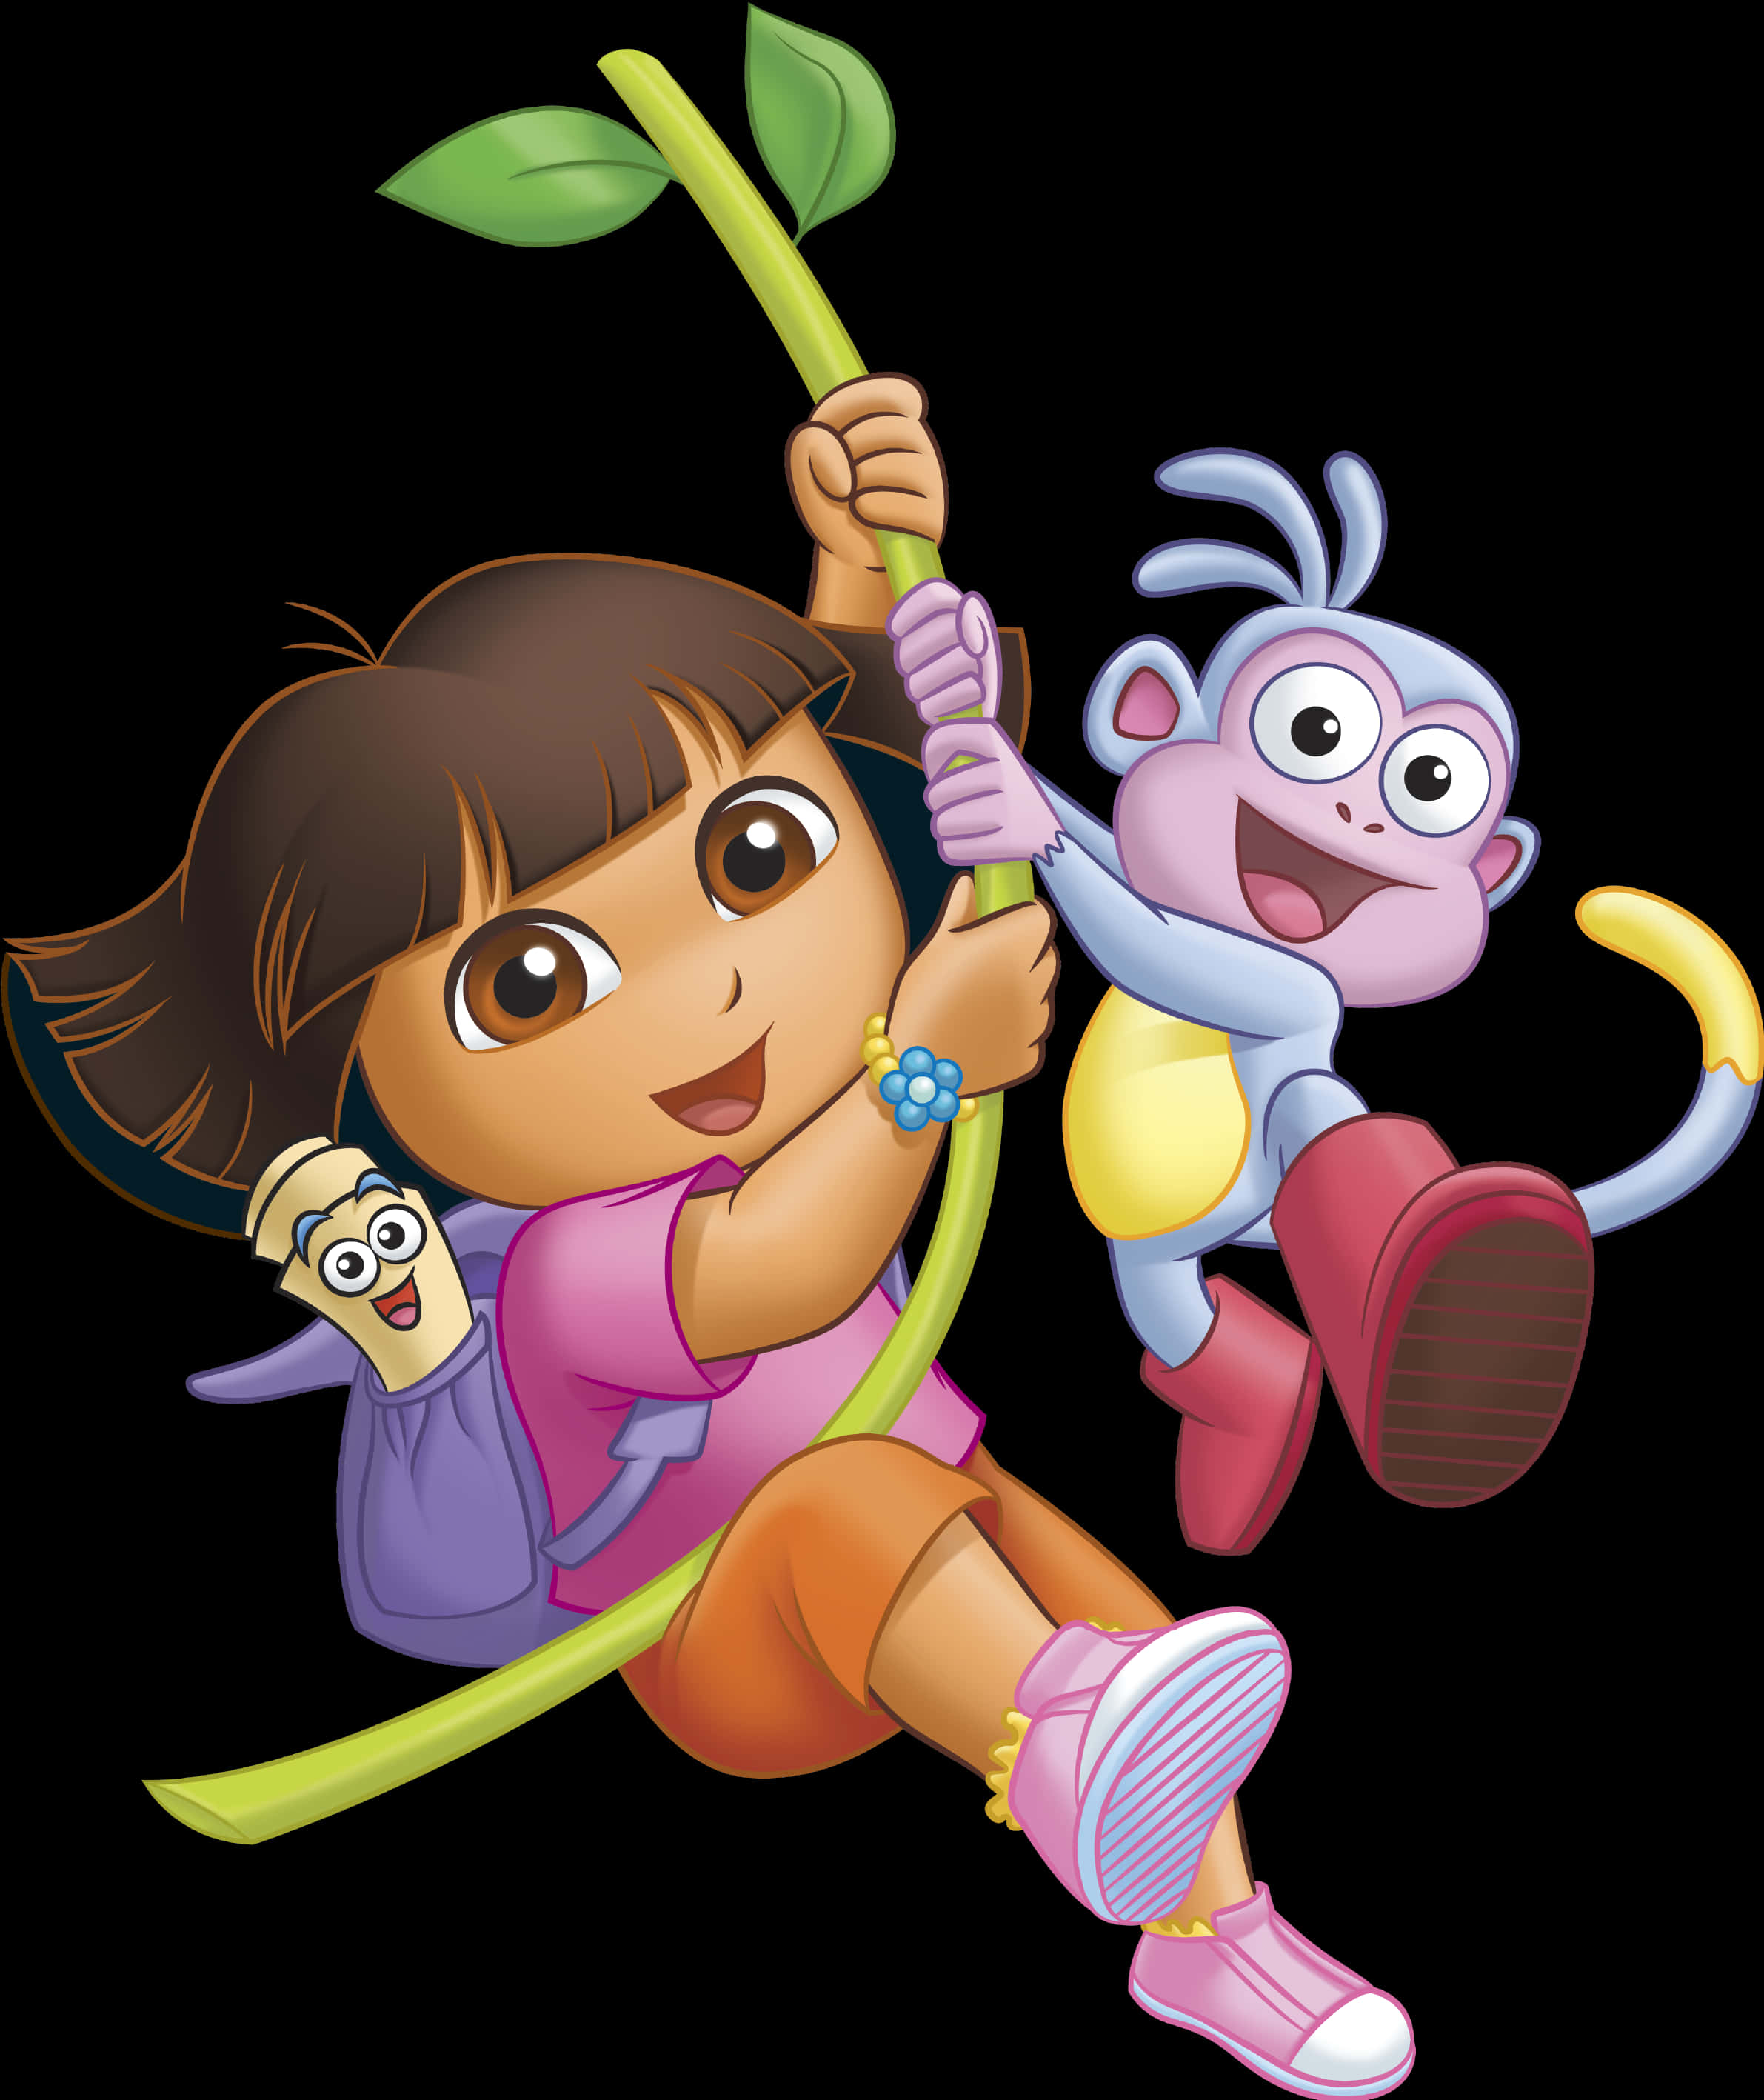 Cartoon Of A Girl And A Monkey